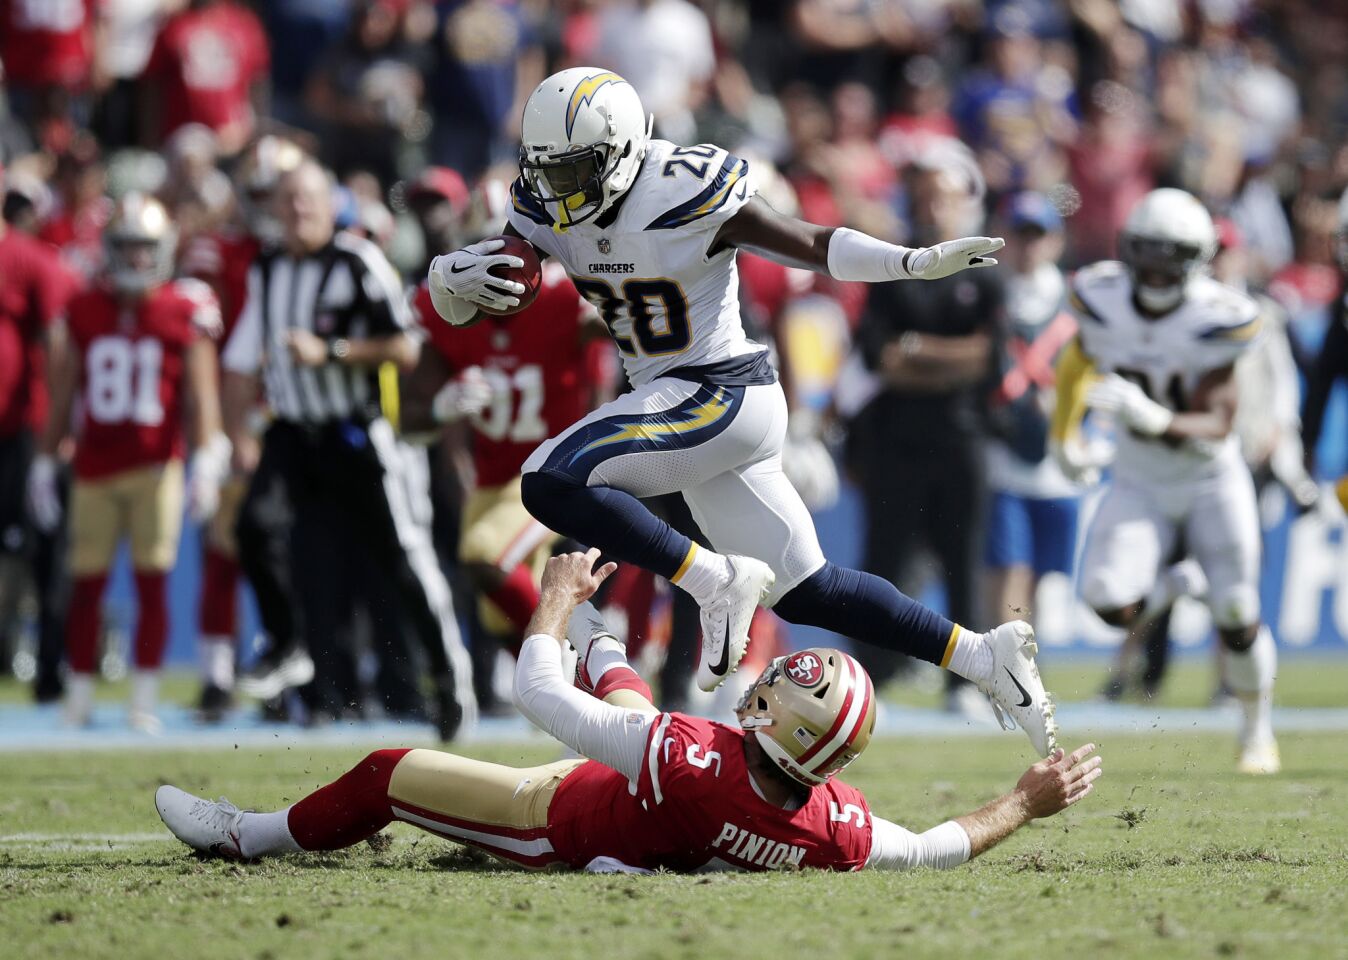 Los Angeles Chargers defensive back Desmond King, top, jumps over San Francisco 49ers punter Bradley Pinion while returning a punt during the first half of an NFL football game, Sunday, Sept. 30, 2018, in Carson, Calif.